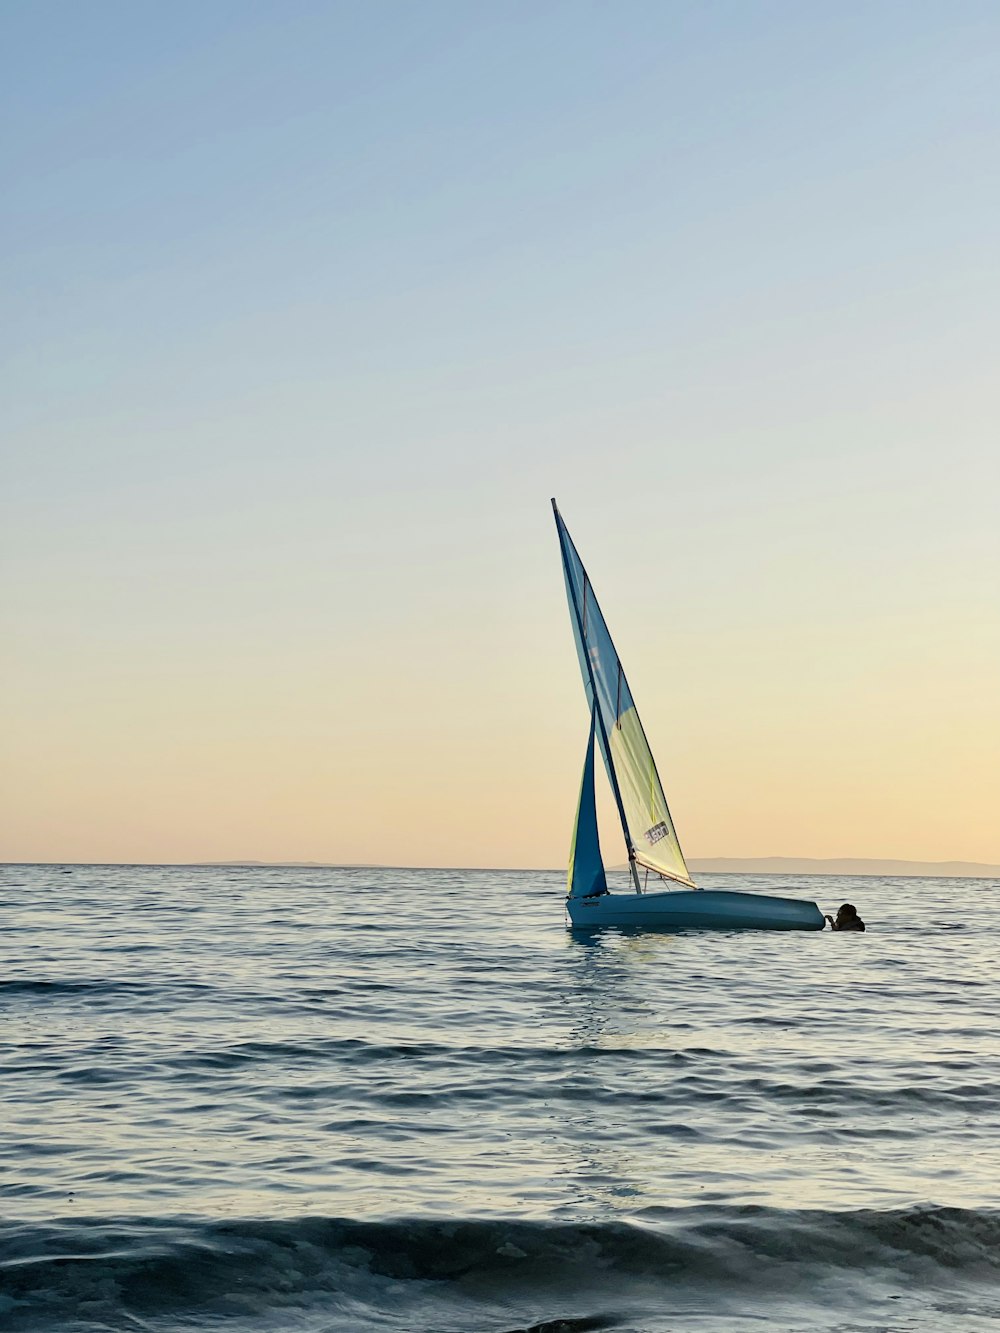 a small sailboat in the middle of the ocean